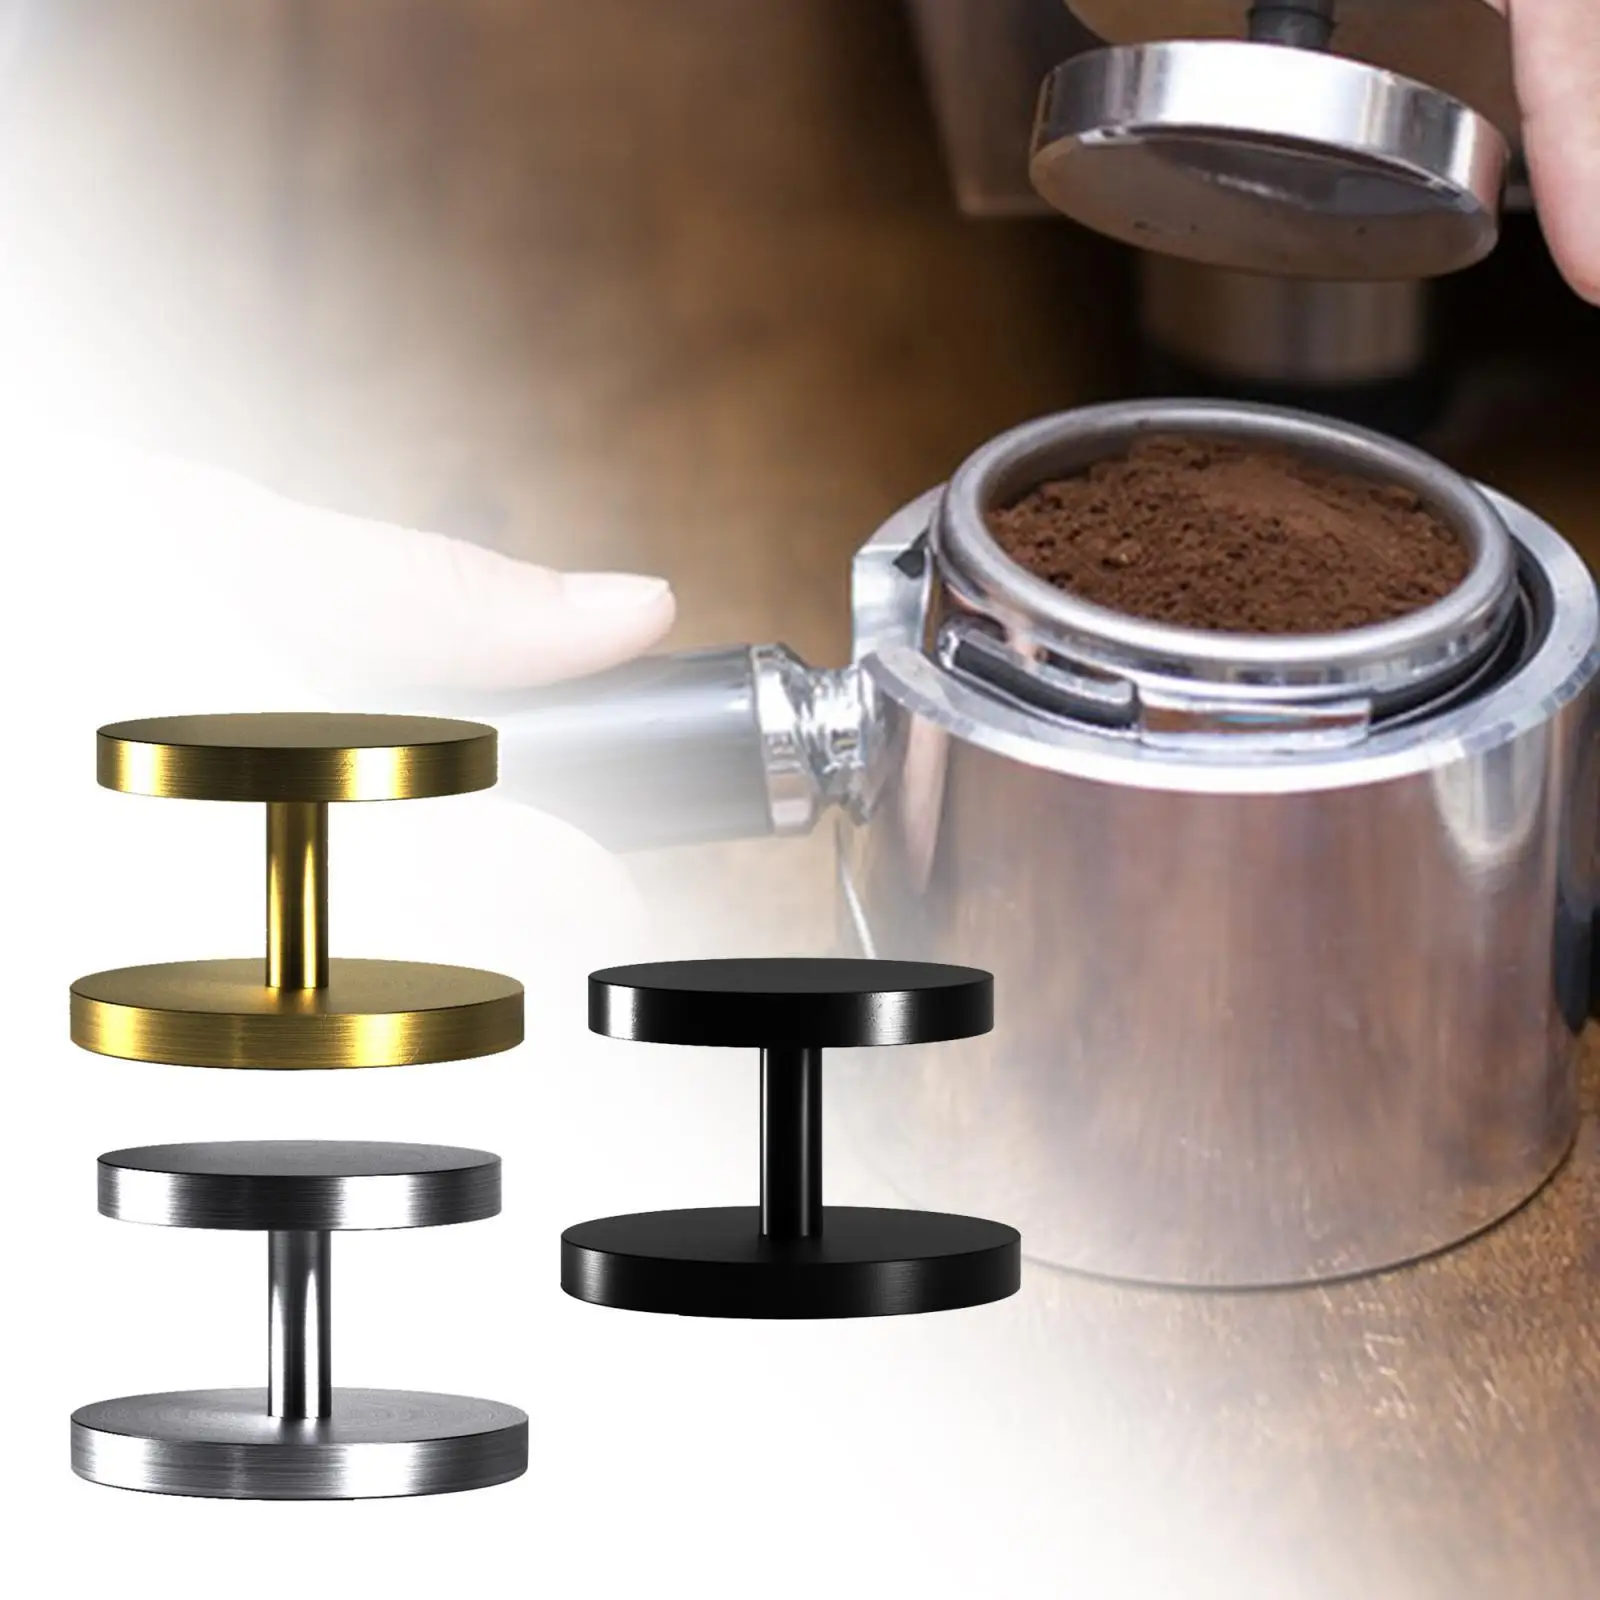 Espresso Tamper Hand Pressing Tool Coffee Bean Pressing Utensils for Working